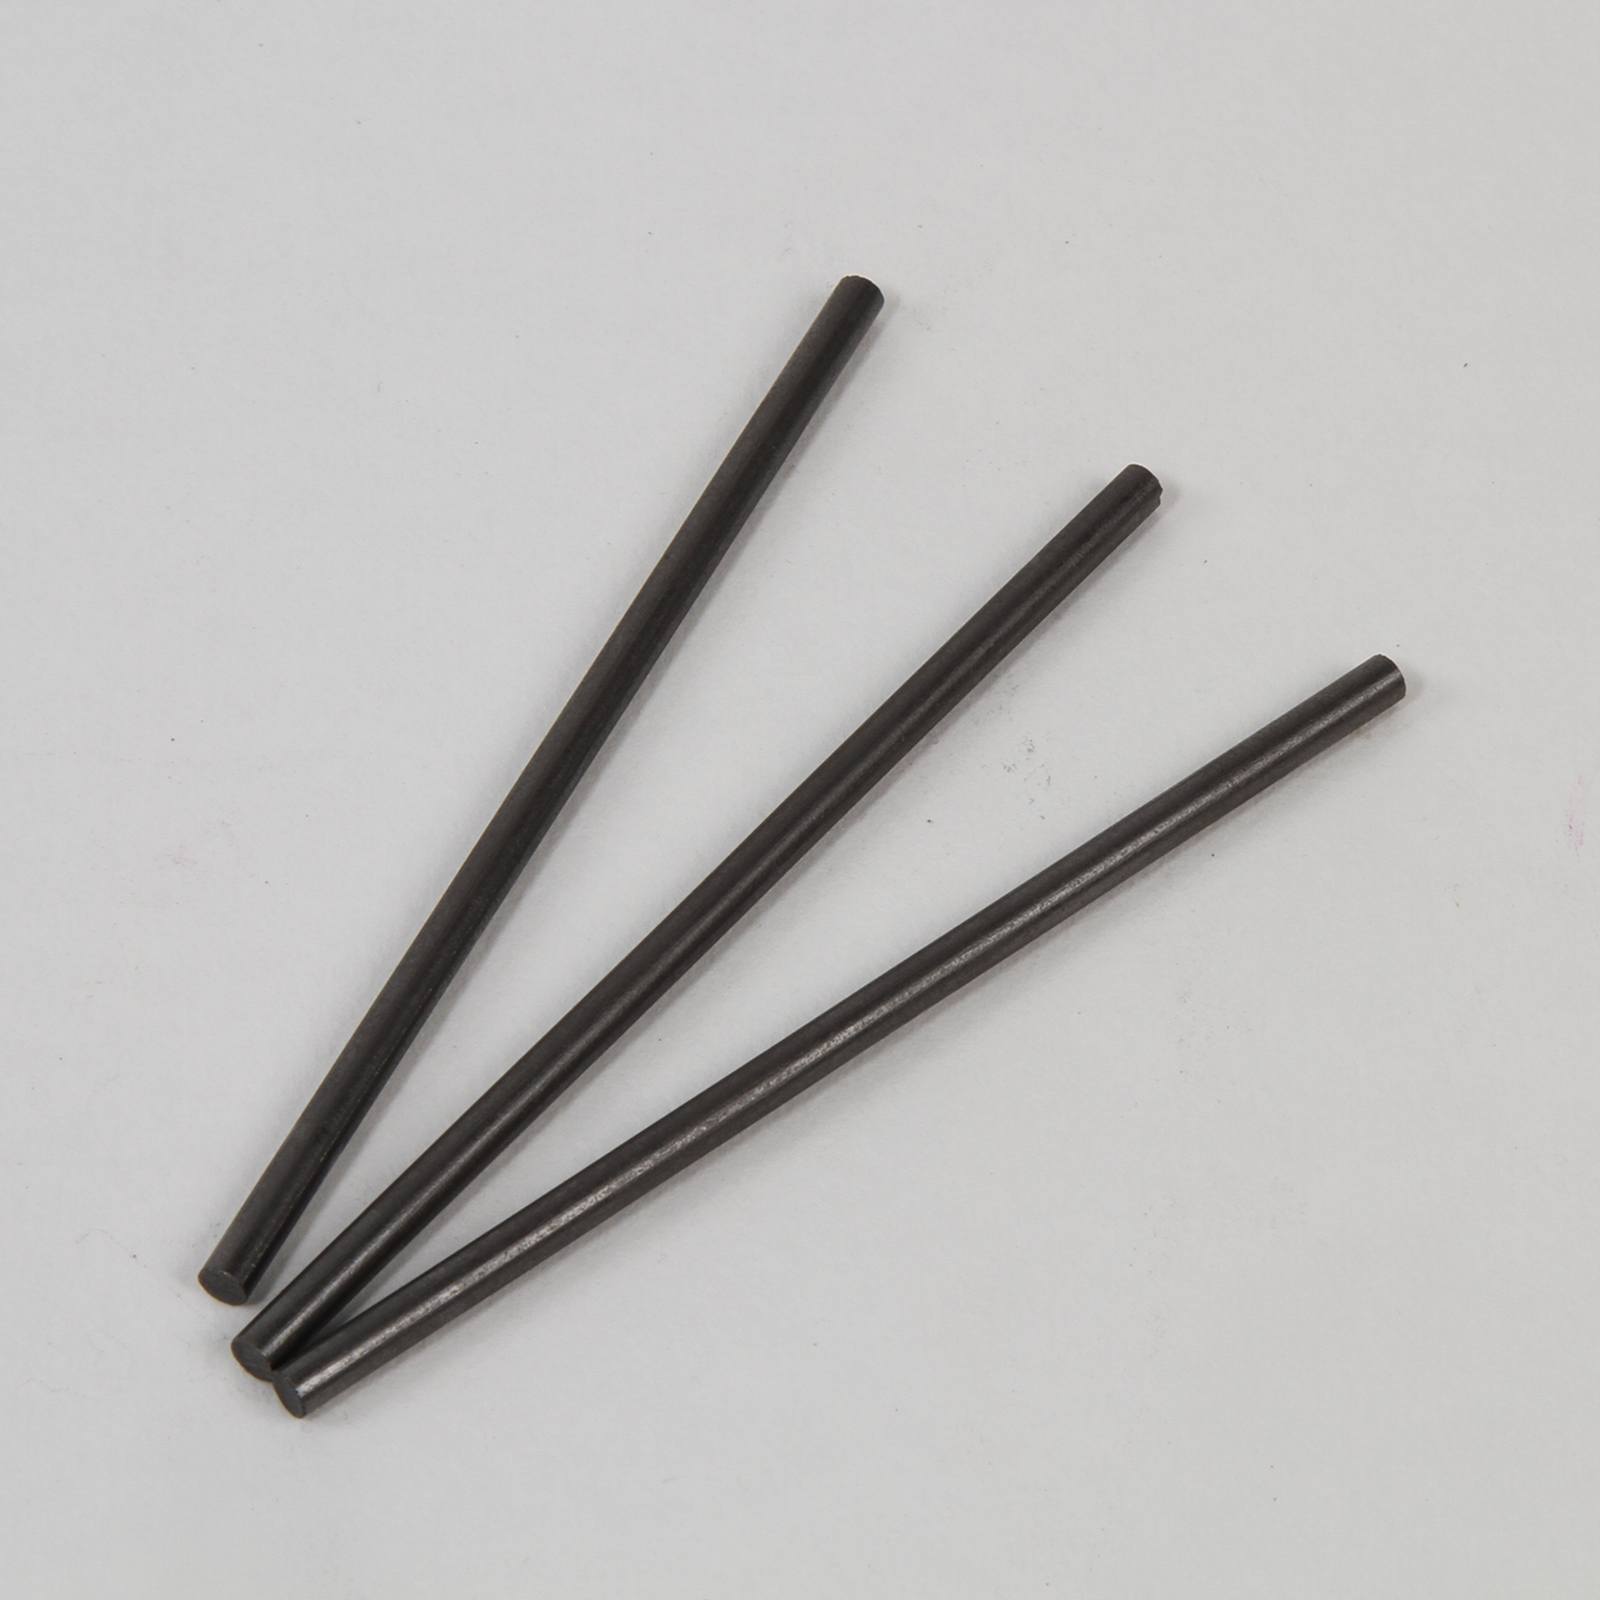 Pack of 3 - 3mm x 80mm leads for Mini Sketch Pencil Kit at Penn